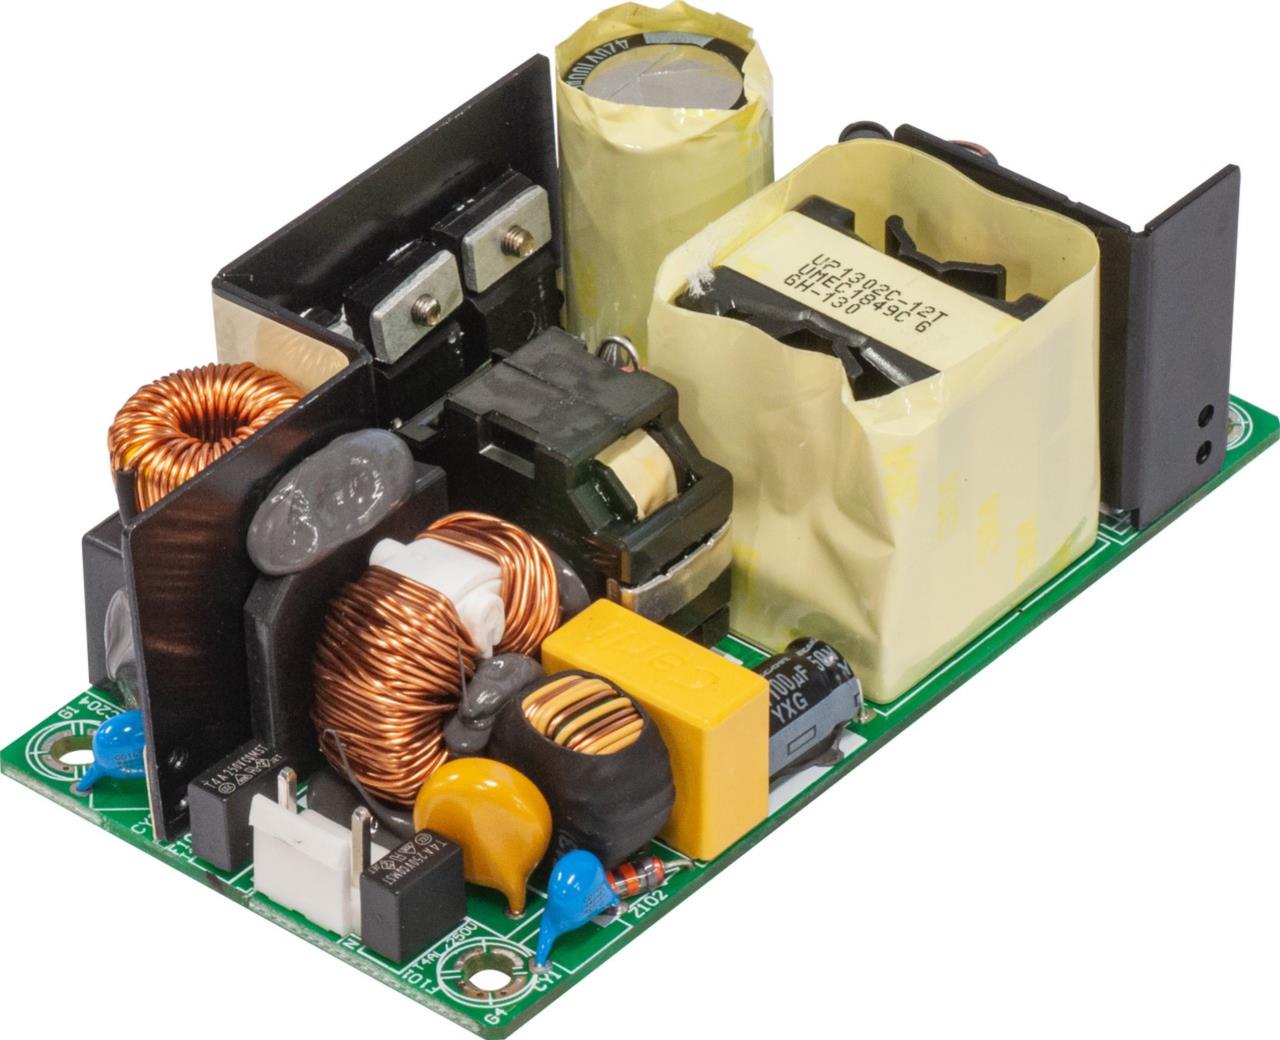 12V 10.8A internal Power Supply for CCR1036 Series